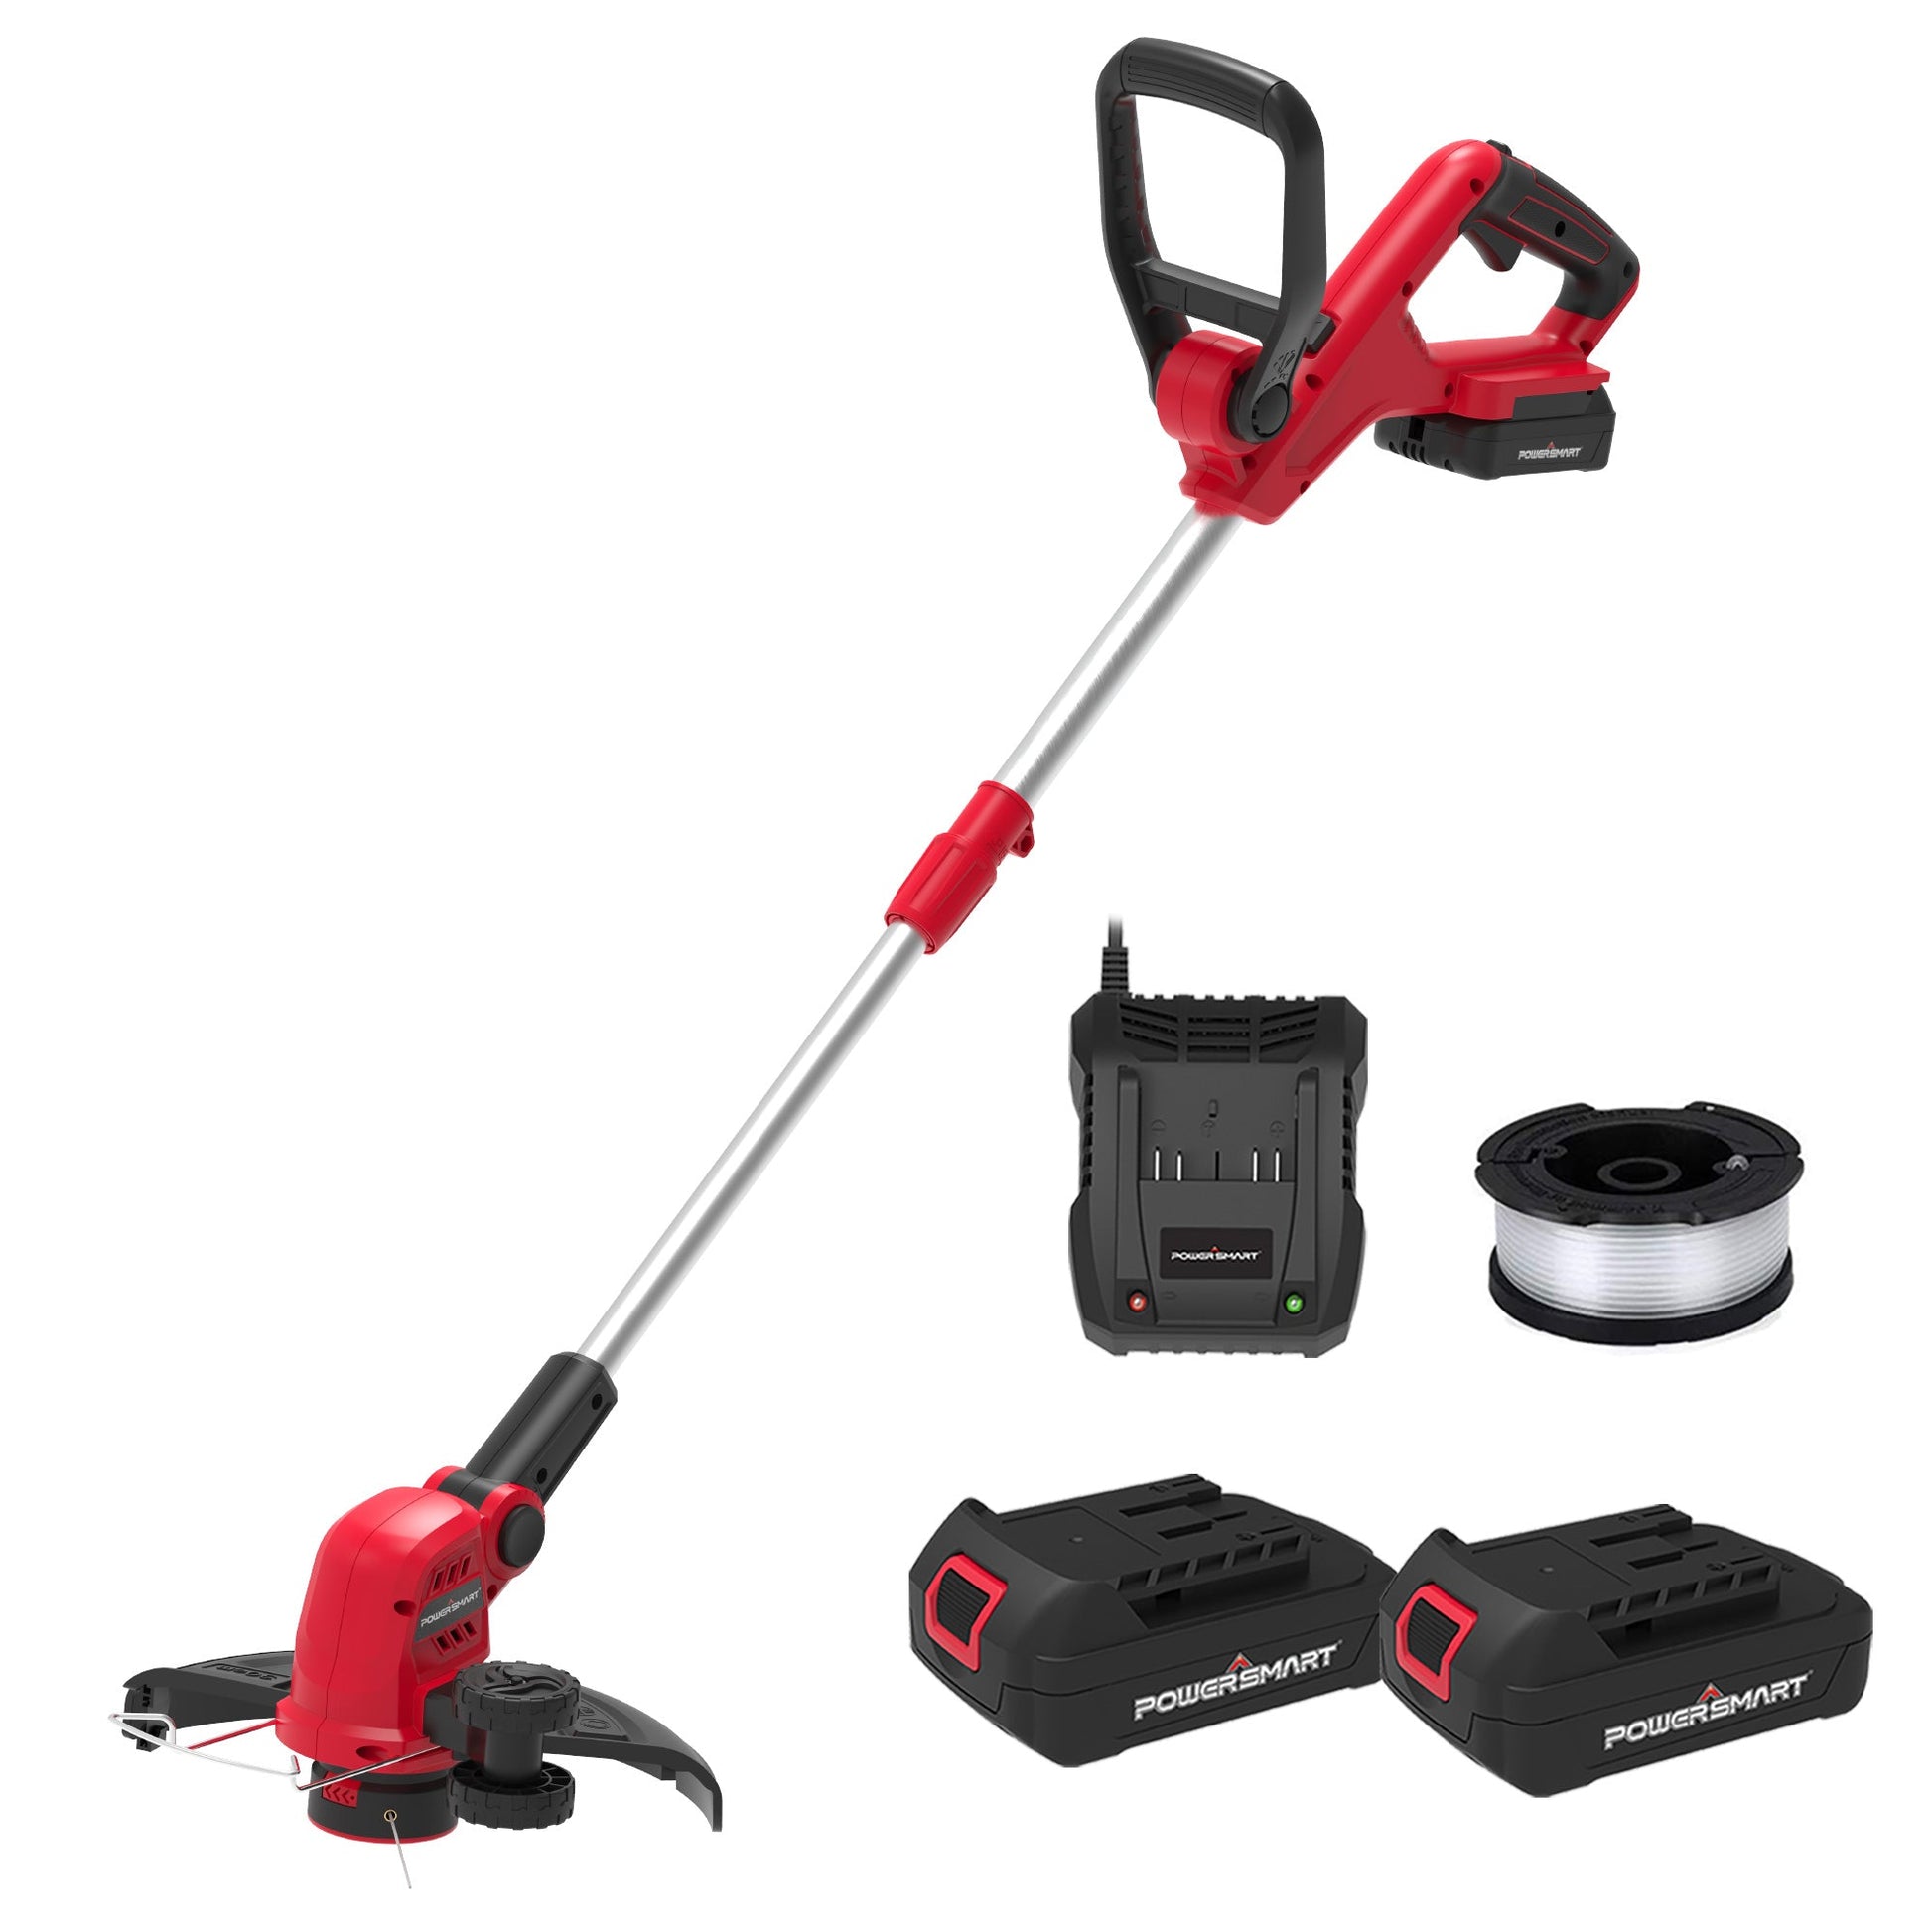 PowerSmart 20V Cordless String Trimmer 12 Inch Weed Eater （Dual Battery）